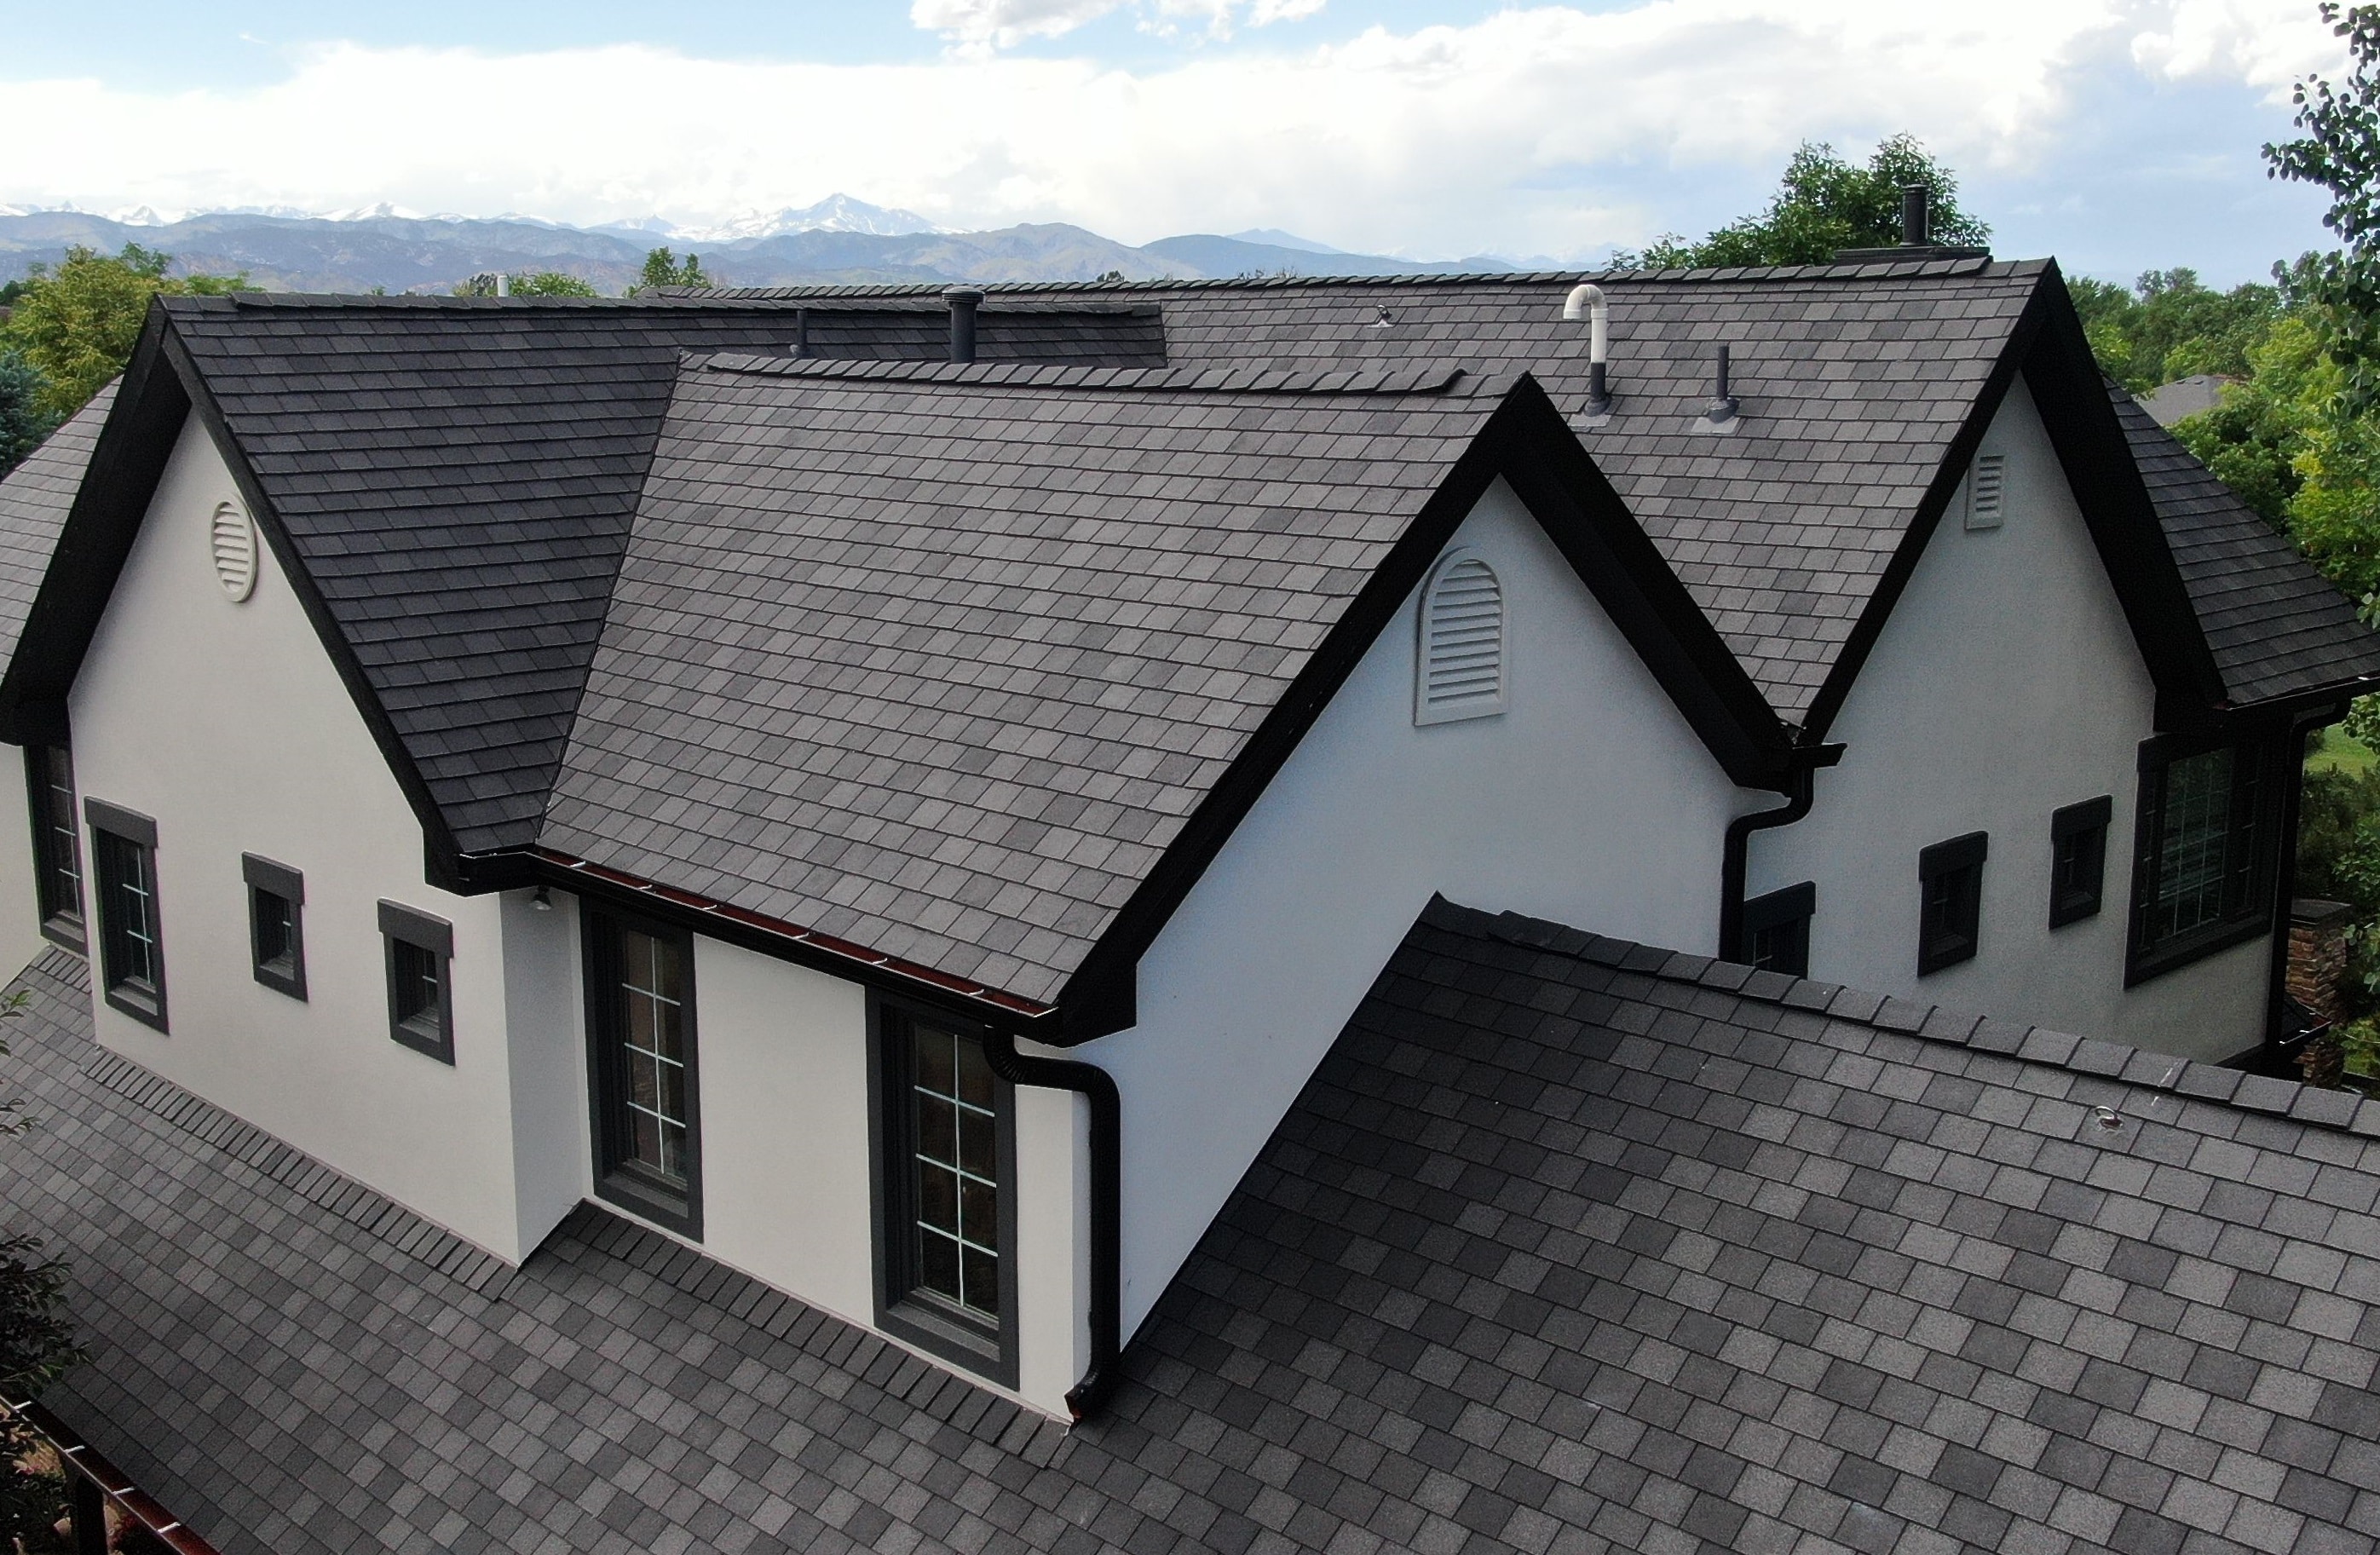 Synthetic Slate Roofing A Better Alternative to Traditional Slate Tiles? F Wave